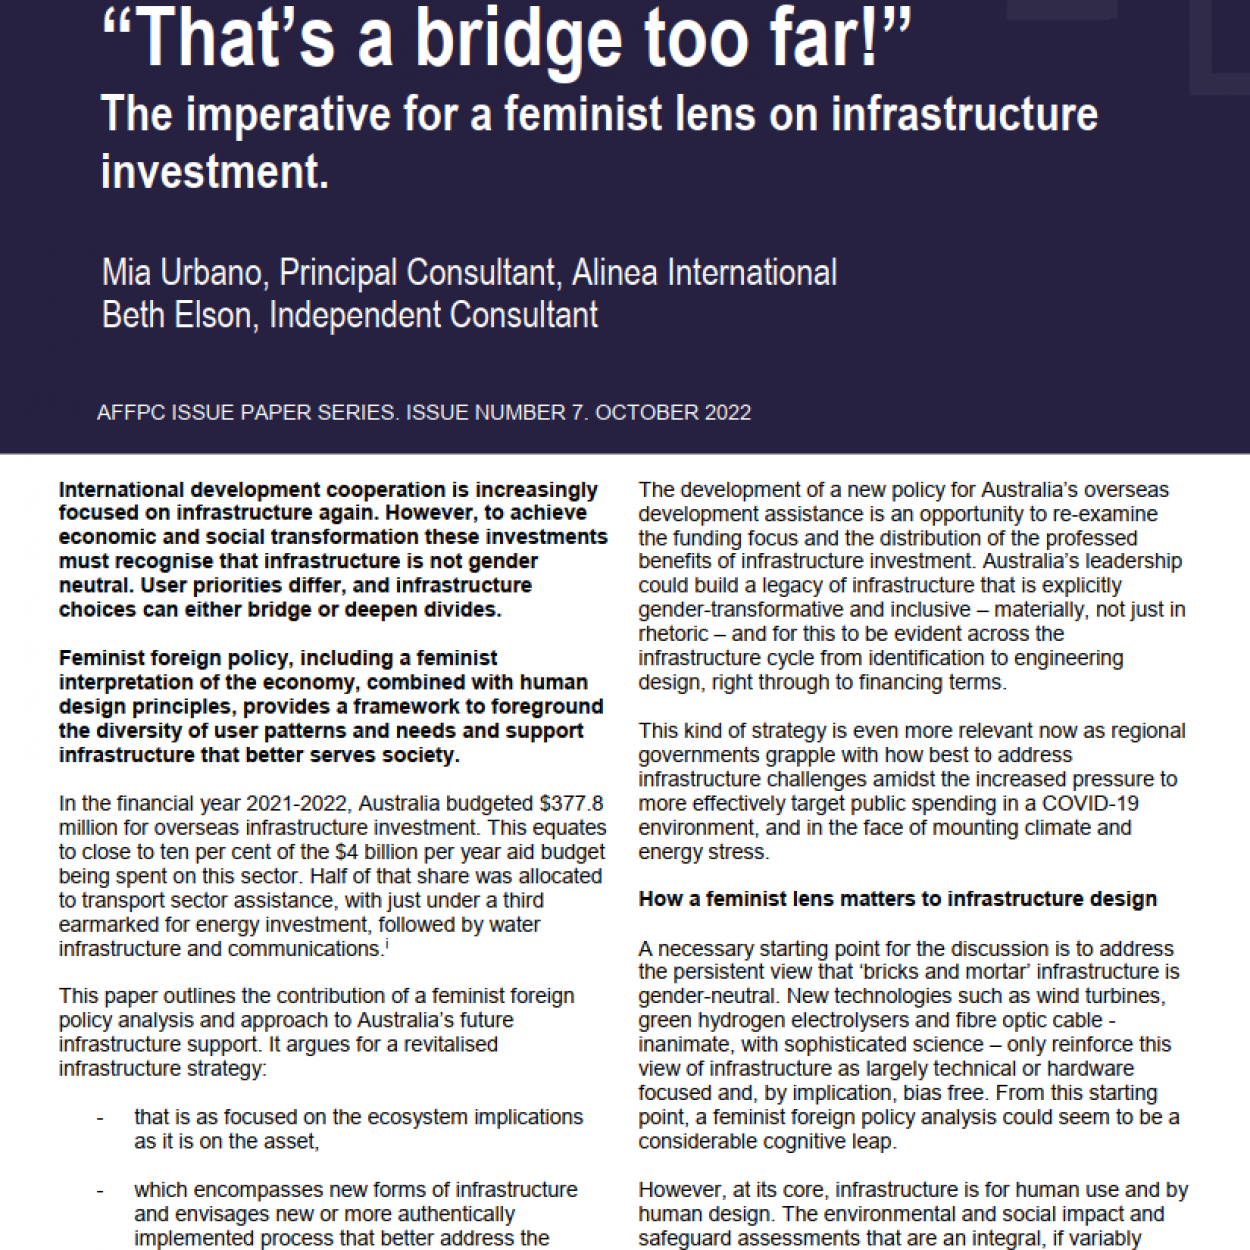 Page one of “That’s a bridge too far!” A Feminist Imperative for Infrastructure Investment